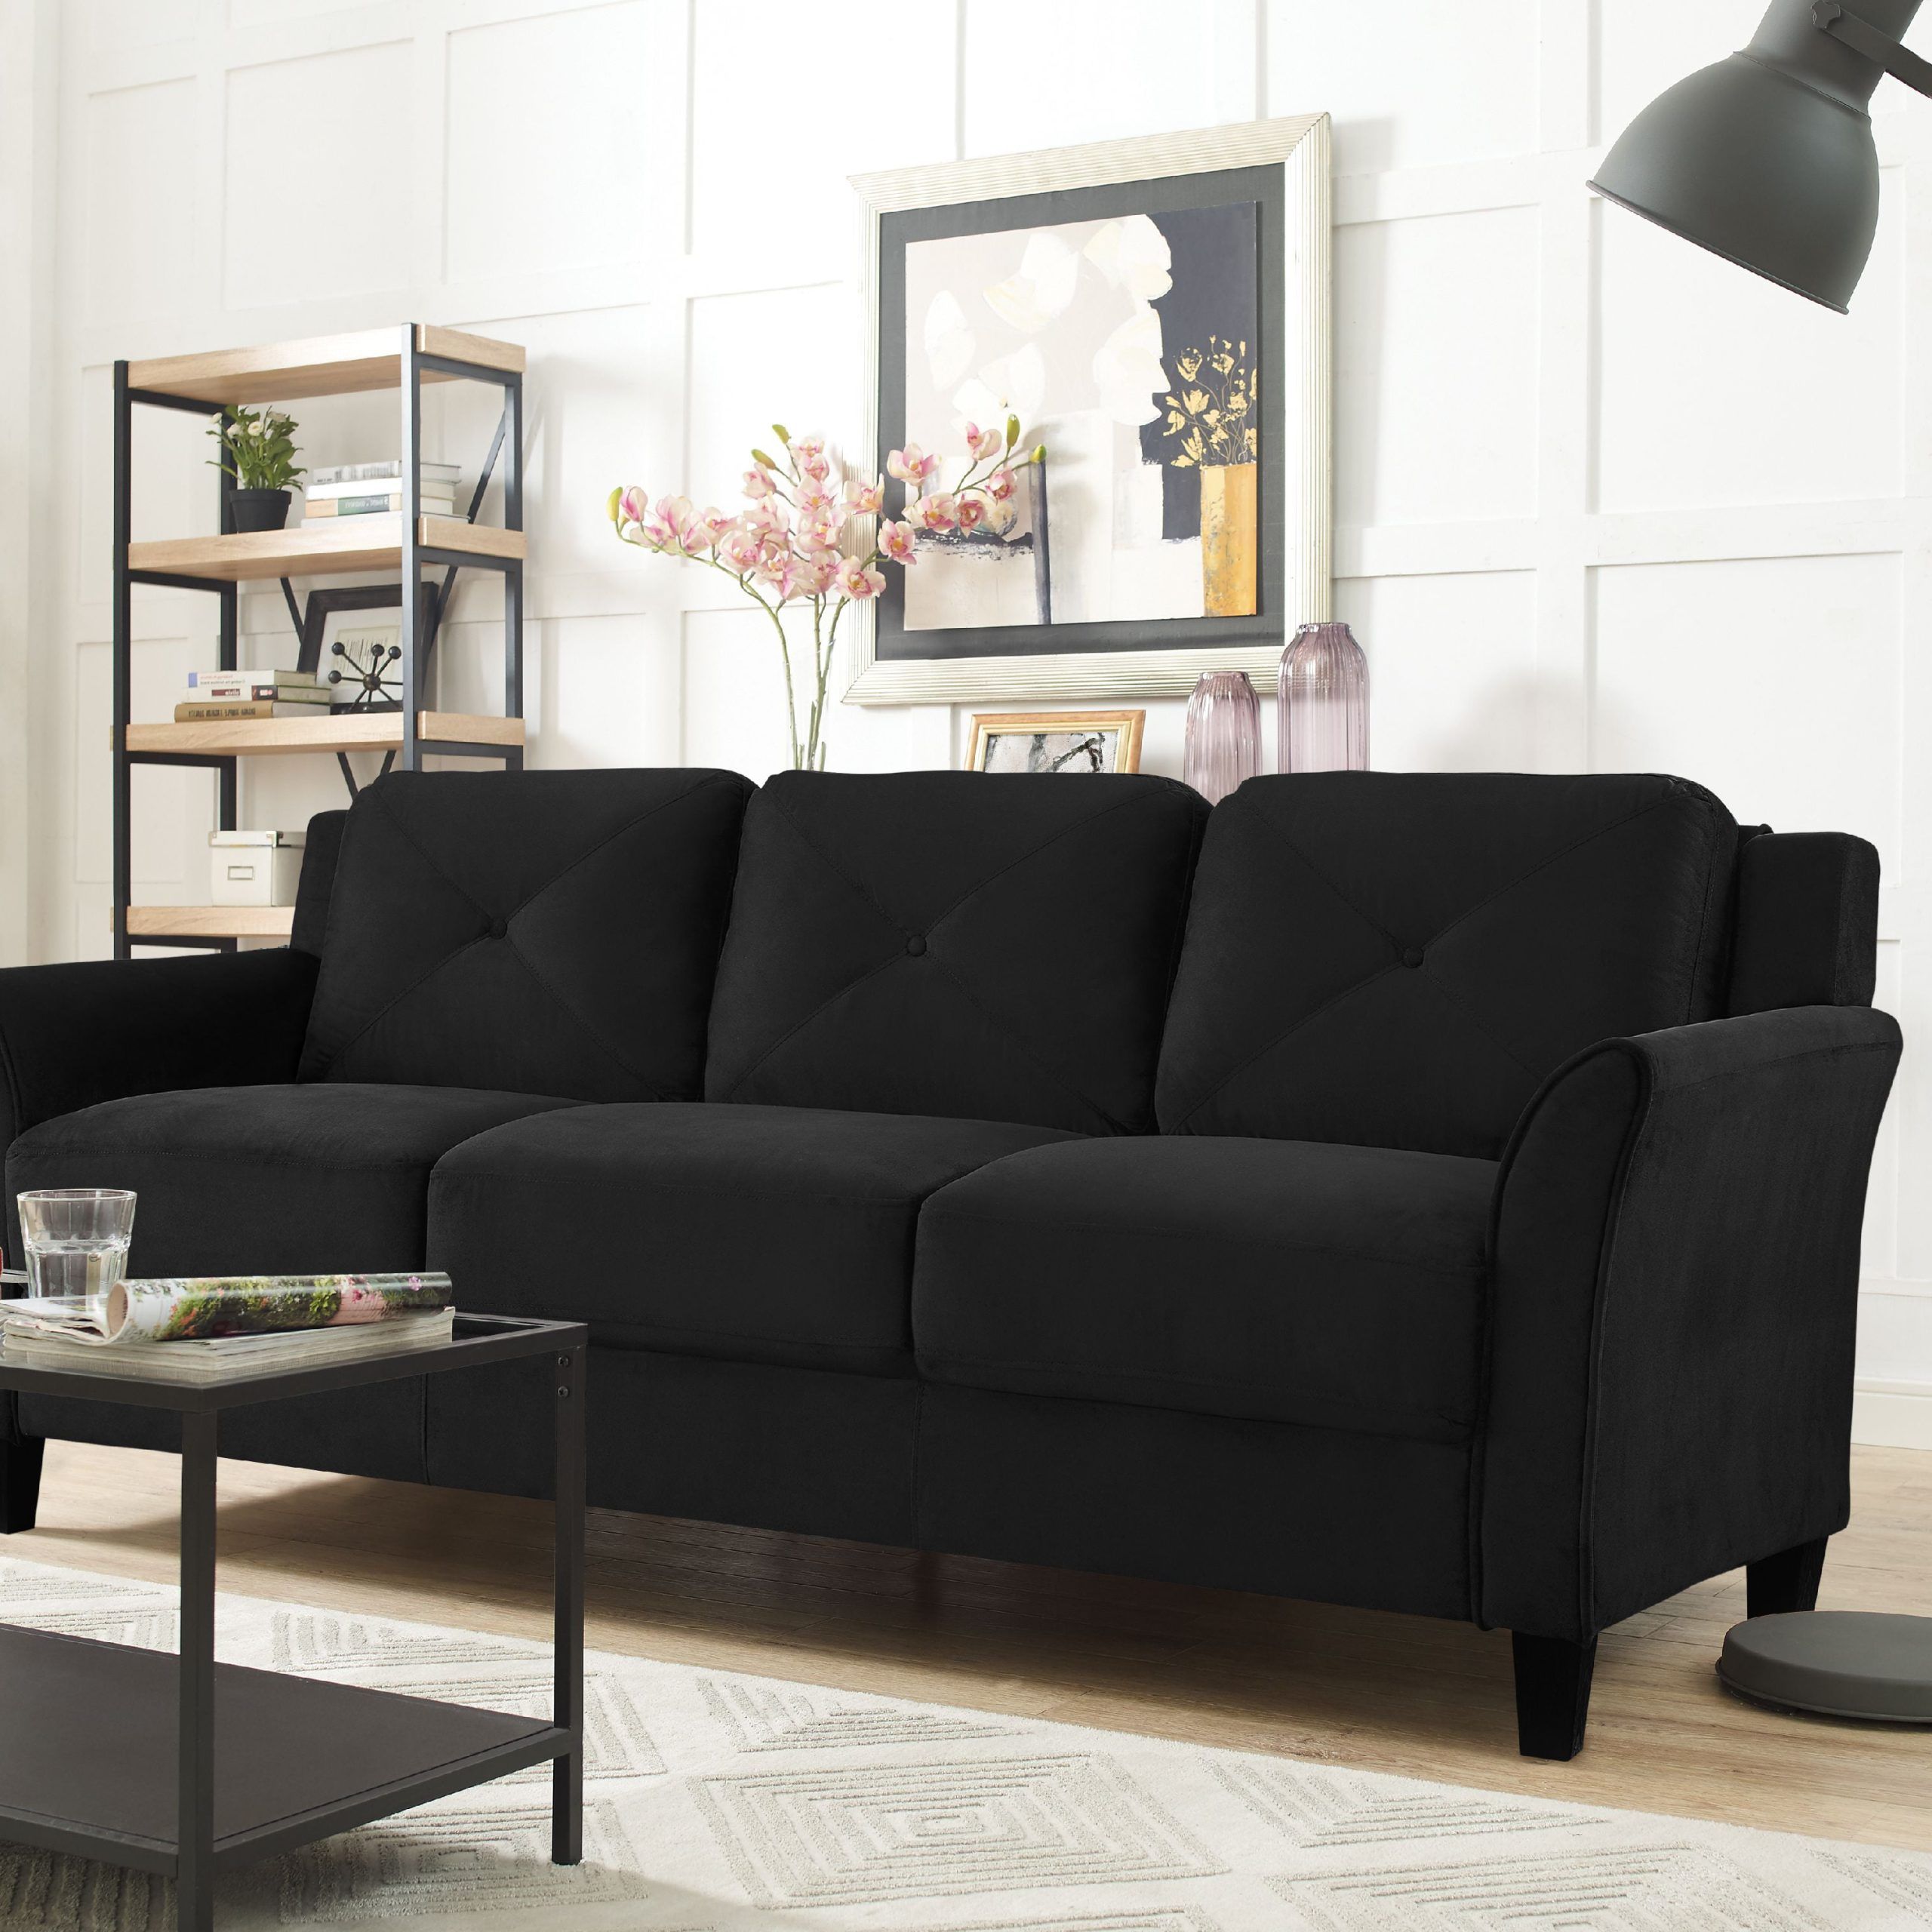 Famous Sofas With Curved Arms Pertaining To Lifestyle Solutions Taryn Curved Arm Fabric Sofa, Black – Walmart (View 4 of 15)